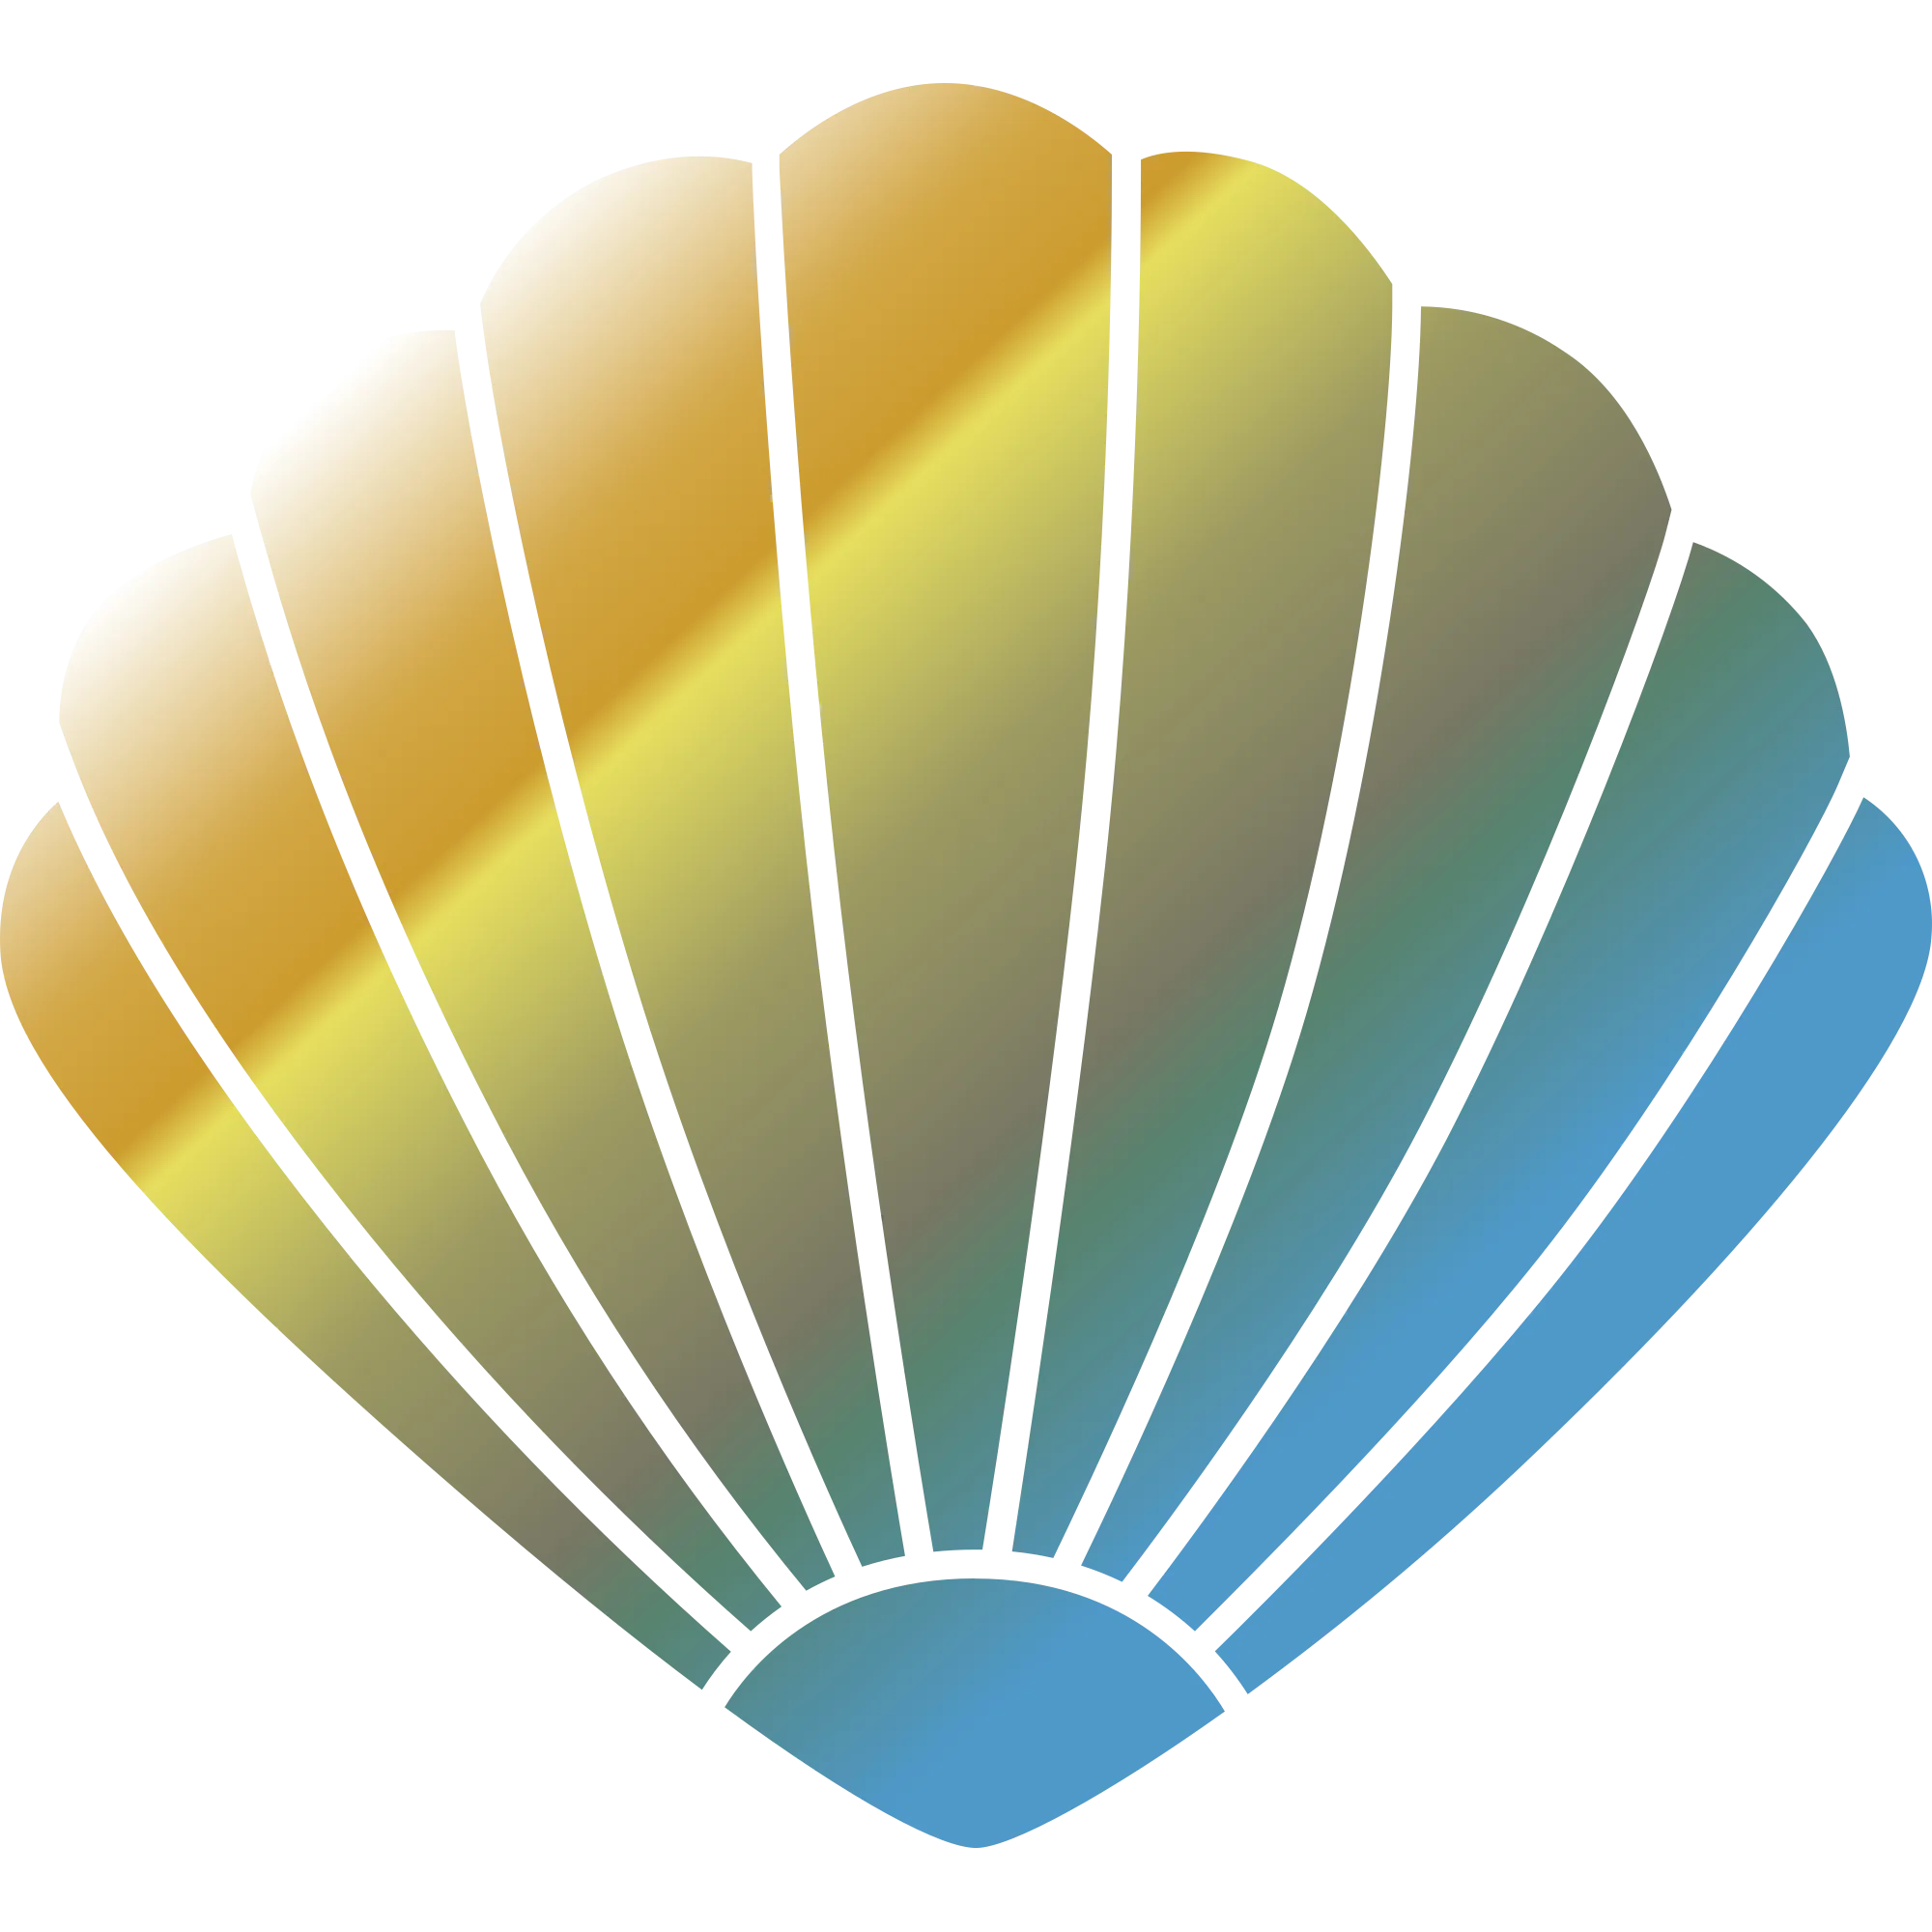 Clams logo in png format